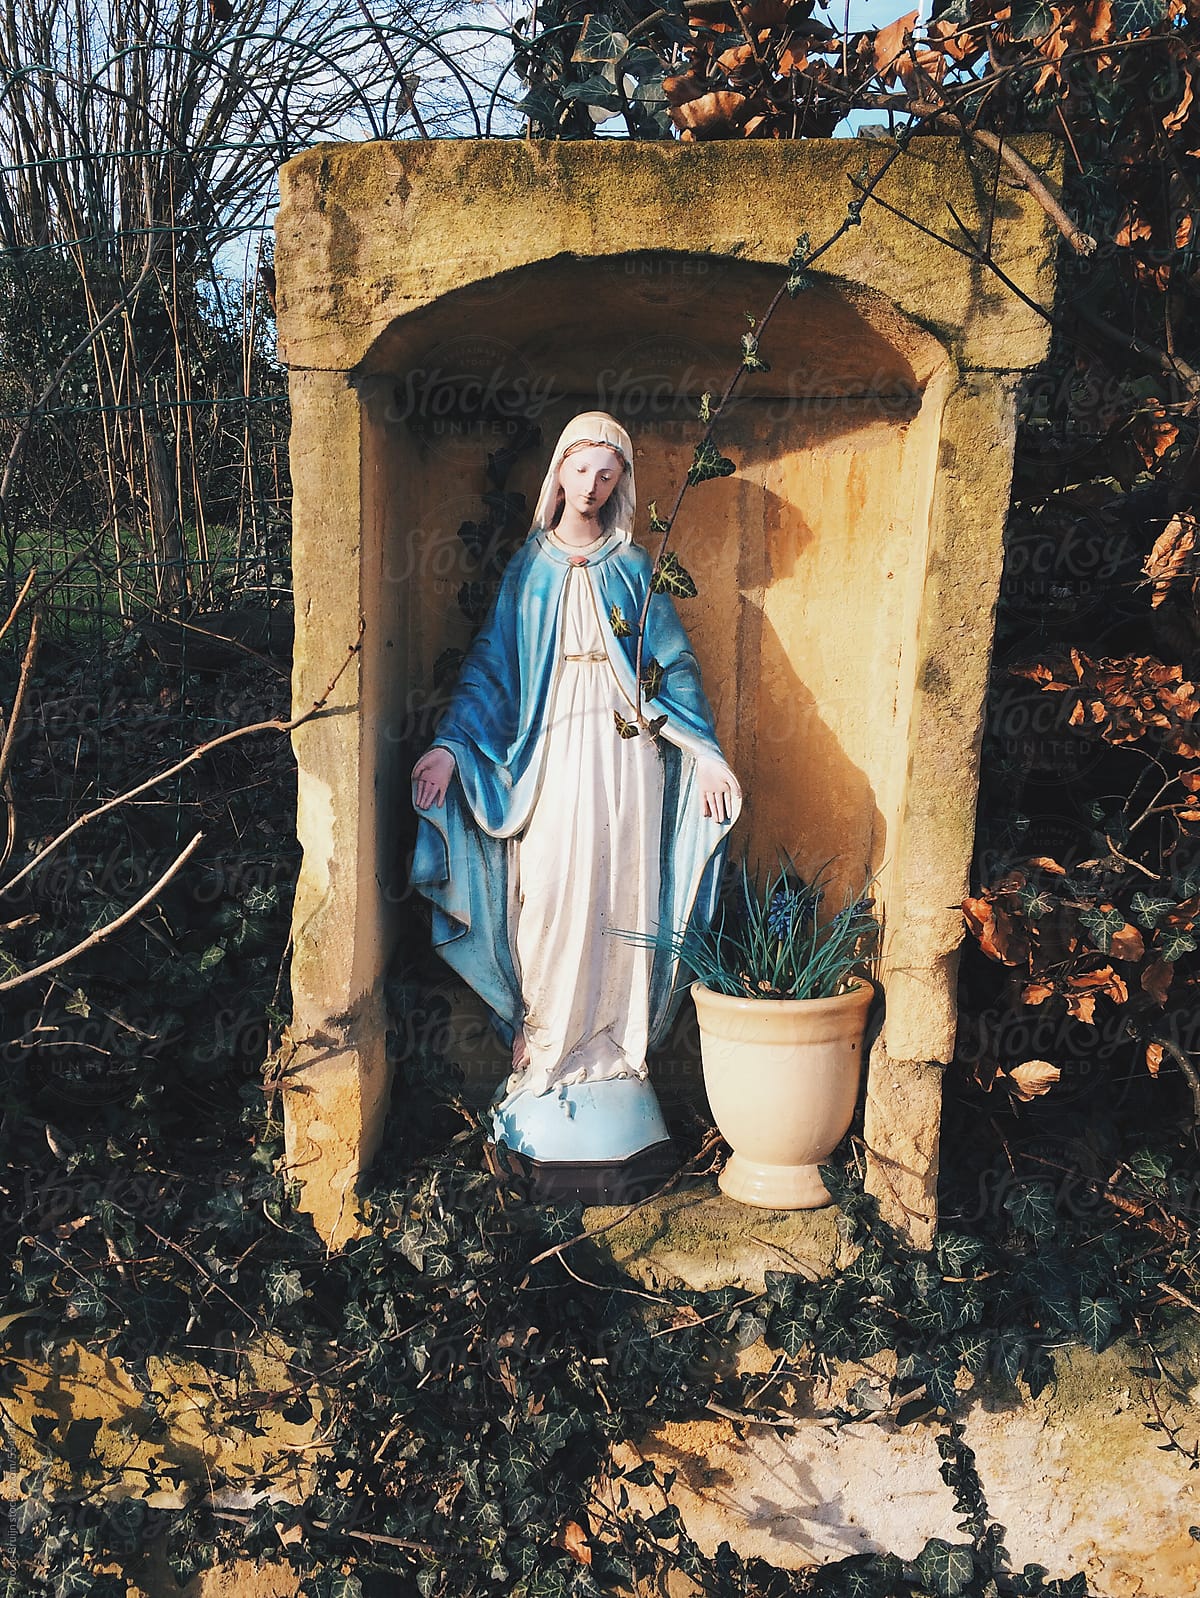 Little catholic shrine of the Holy Virgin Mary on the side of the road